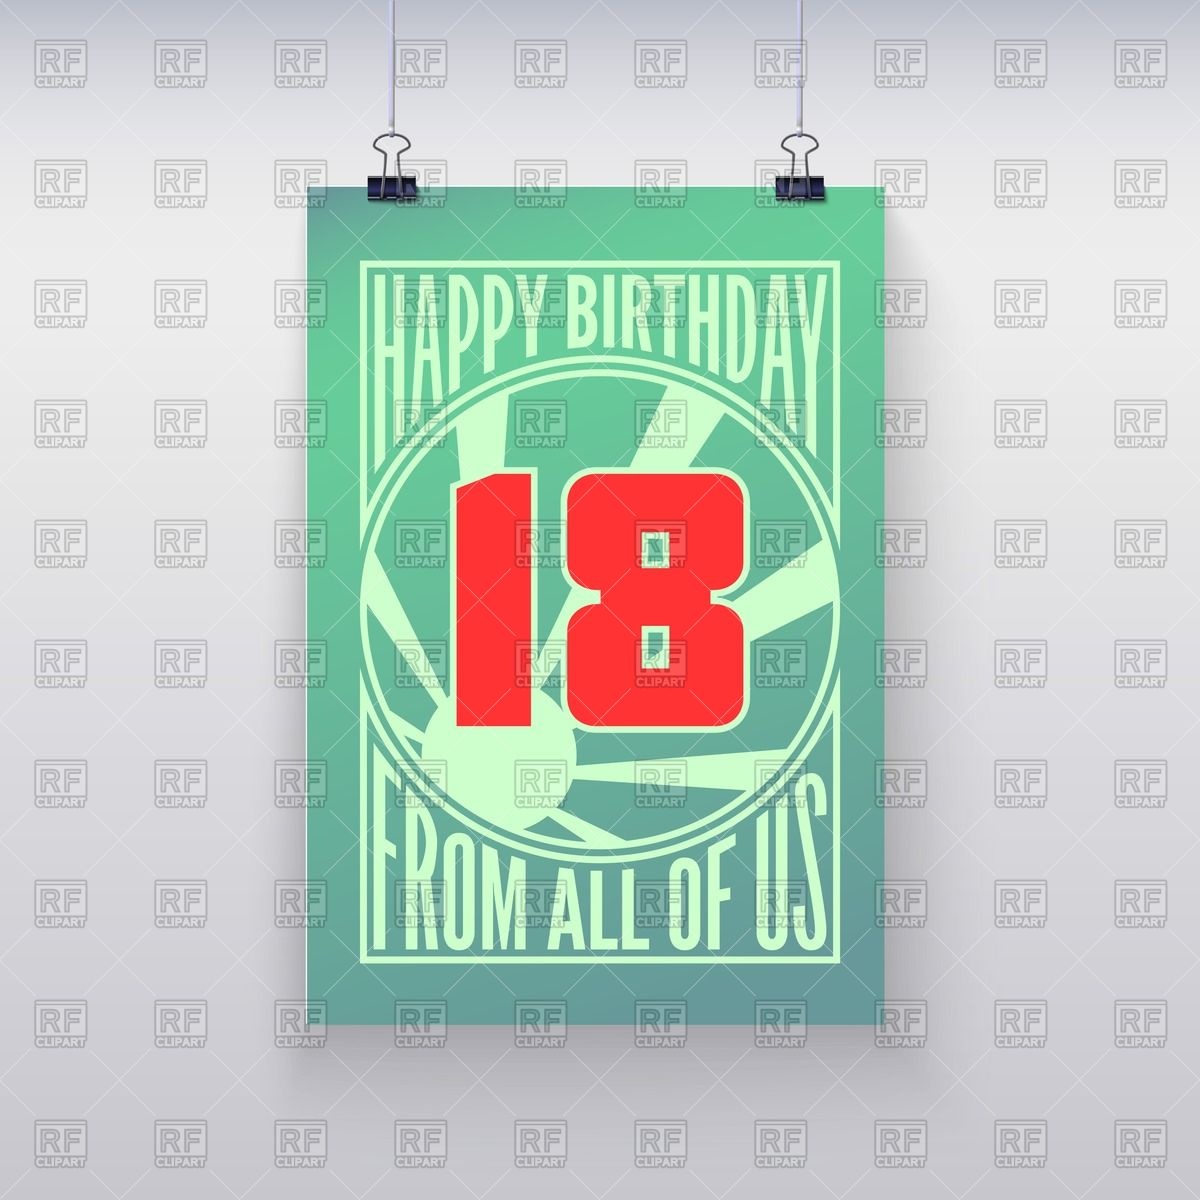 Birthday Greetings Retro Poster   18 Years Holiday Download Royalty    